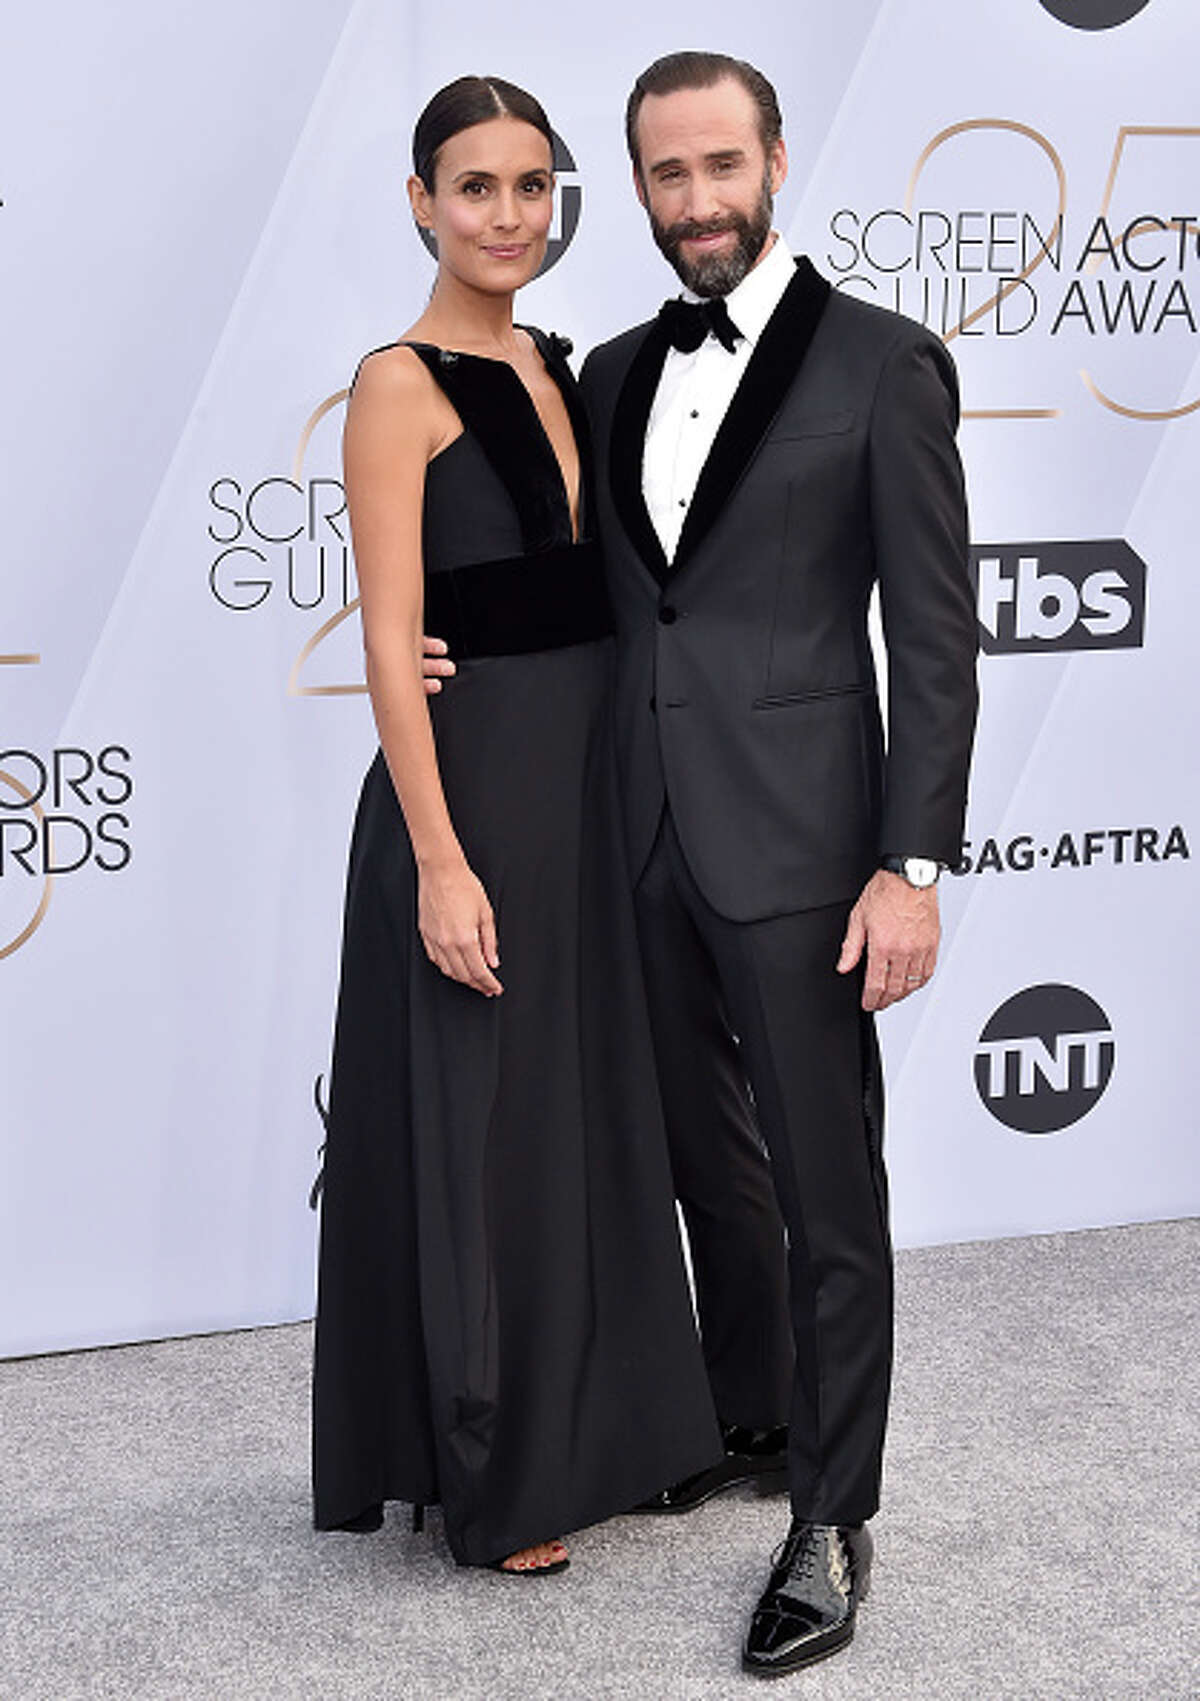 LOS ANGELES, CA - JANUARY 27: Maria Dolores Dieguez (L) and Joseph Fiennes attend the 25th Annual Screen Actors Guild Awards at The Shrine Auditorium on January 27, 2019 in Los Angeles, California. (Photo by Axelle/Bauer-Griffin/FilmMagic)